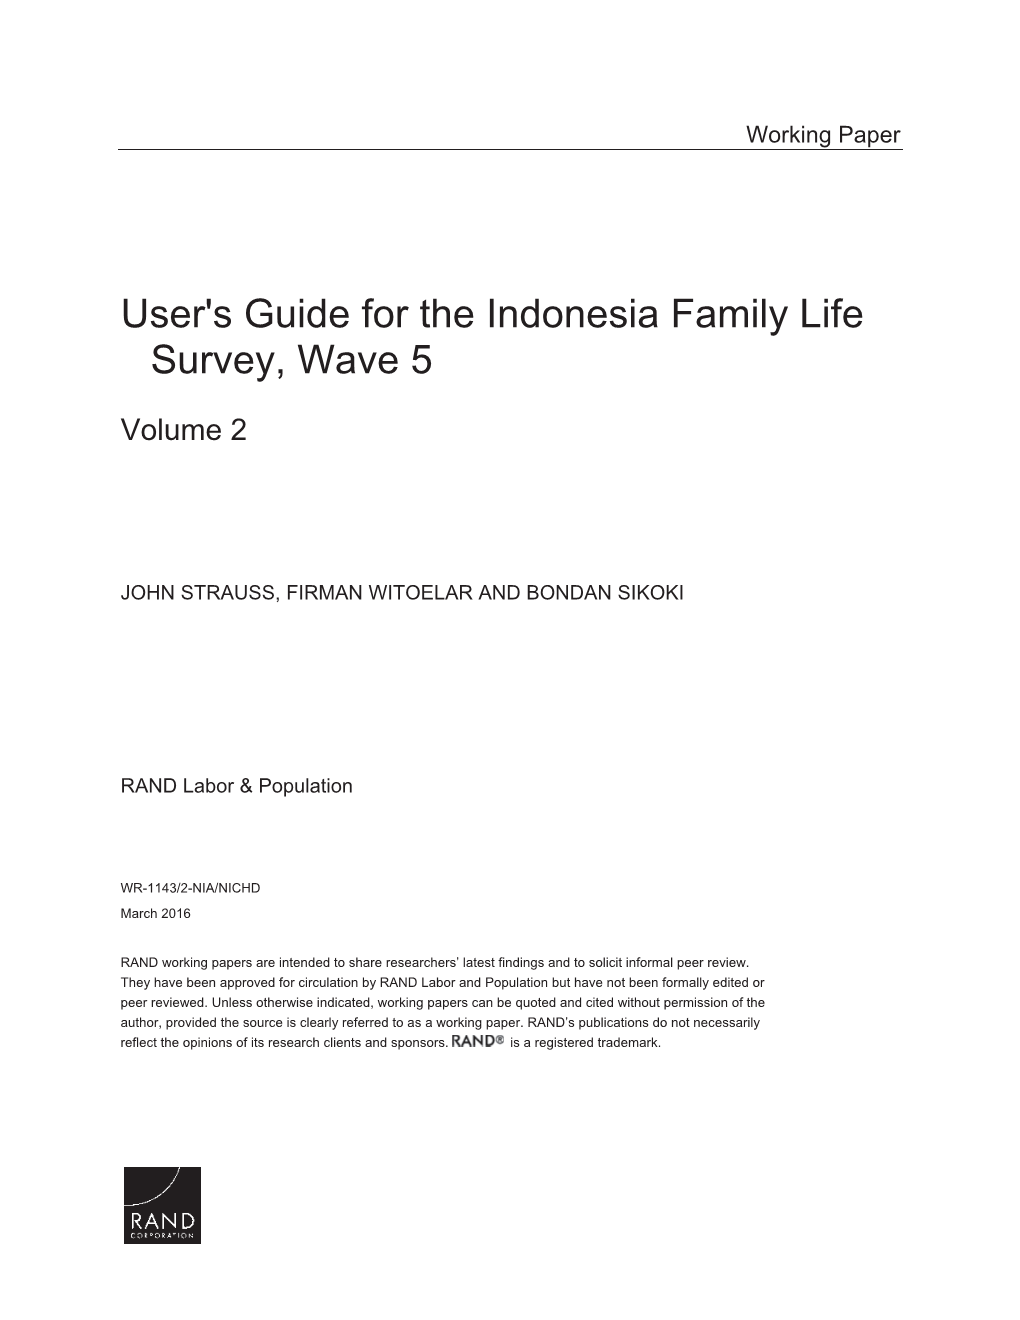 User's Guide for the Indonesia Family Life Survey, Wave 5: Volume 2